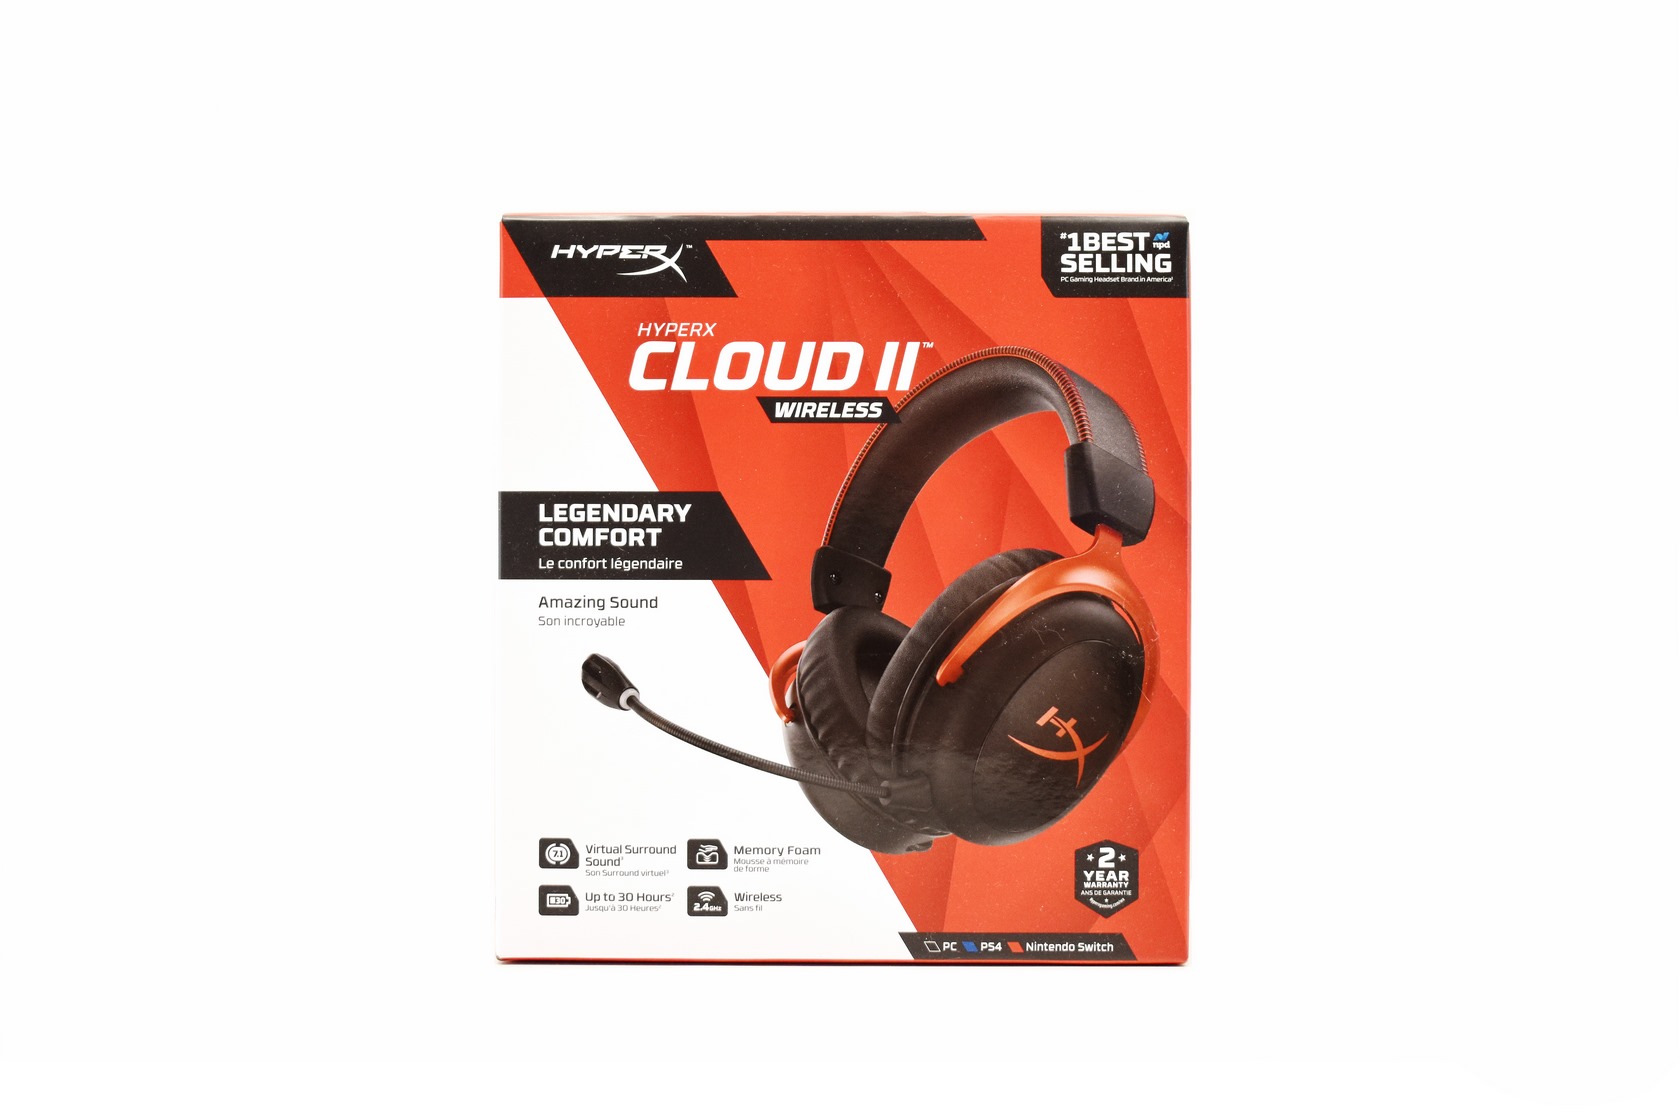 HyperX Cloud 2 wireless gaming headset is comfy but basic for the